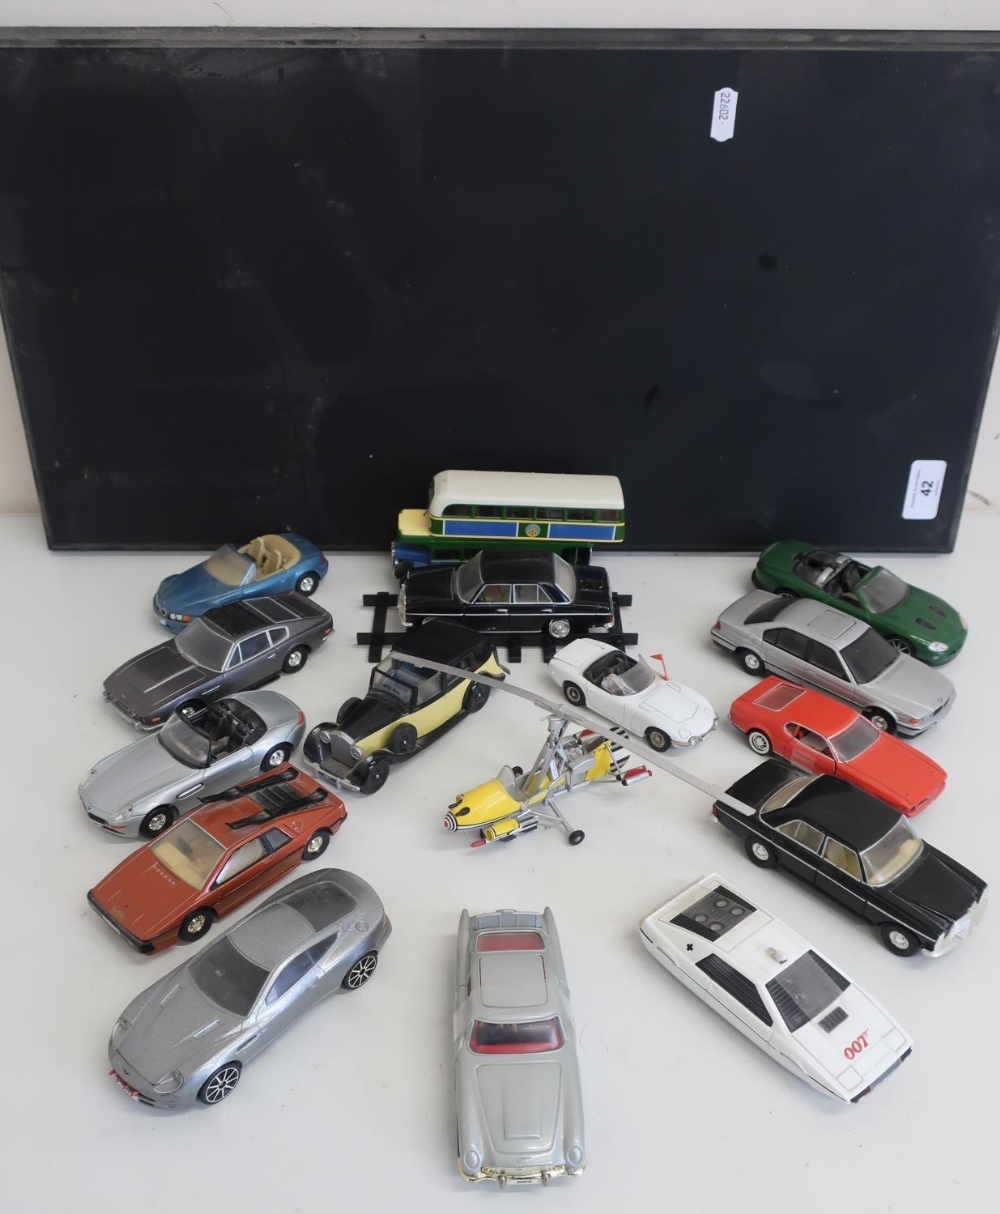 The Definitive Bond Collection of Corgi 007 die-cast unboxed vehicles on display stand (16)